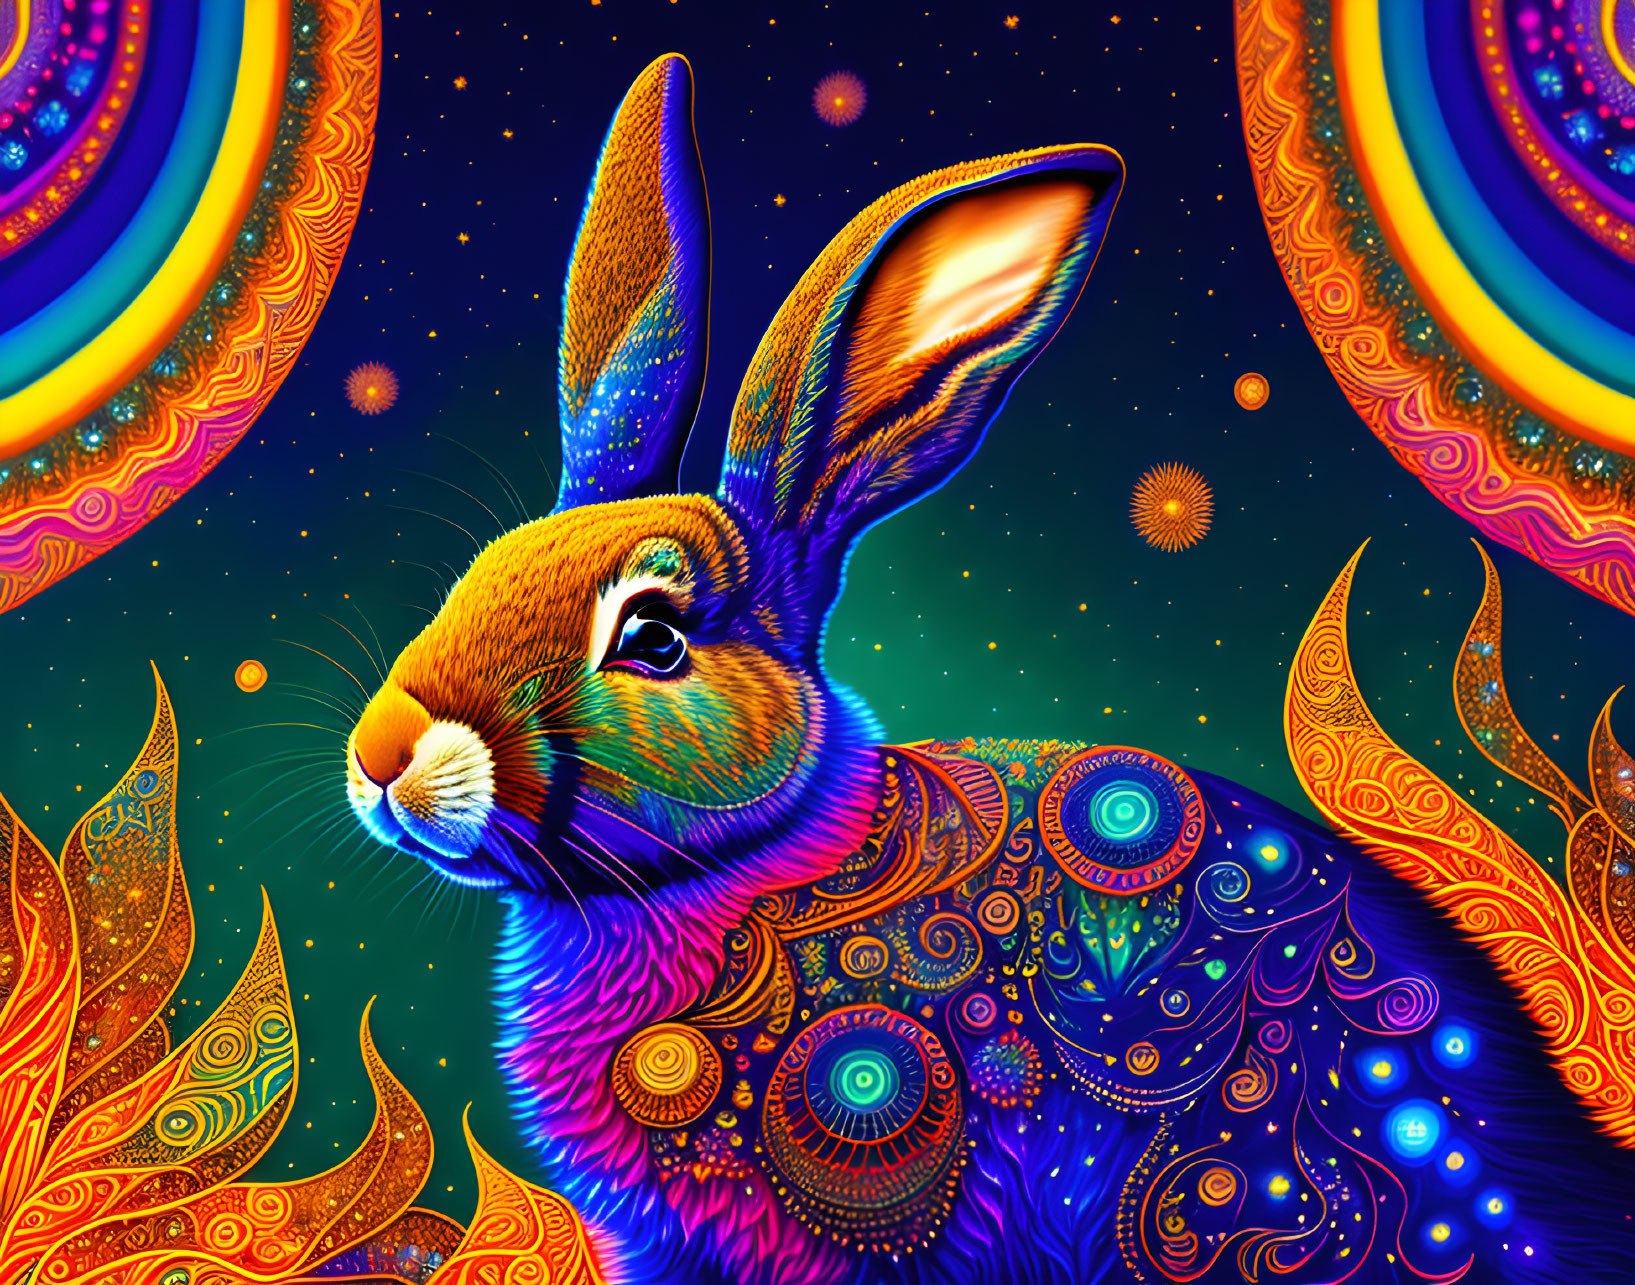 Colorful Stylized Rabbit Art with Cosmic Background